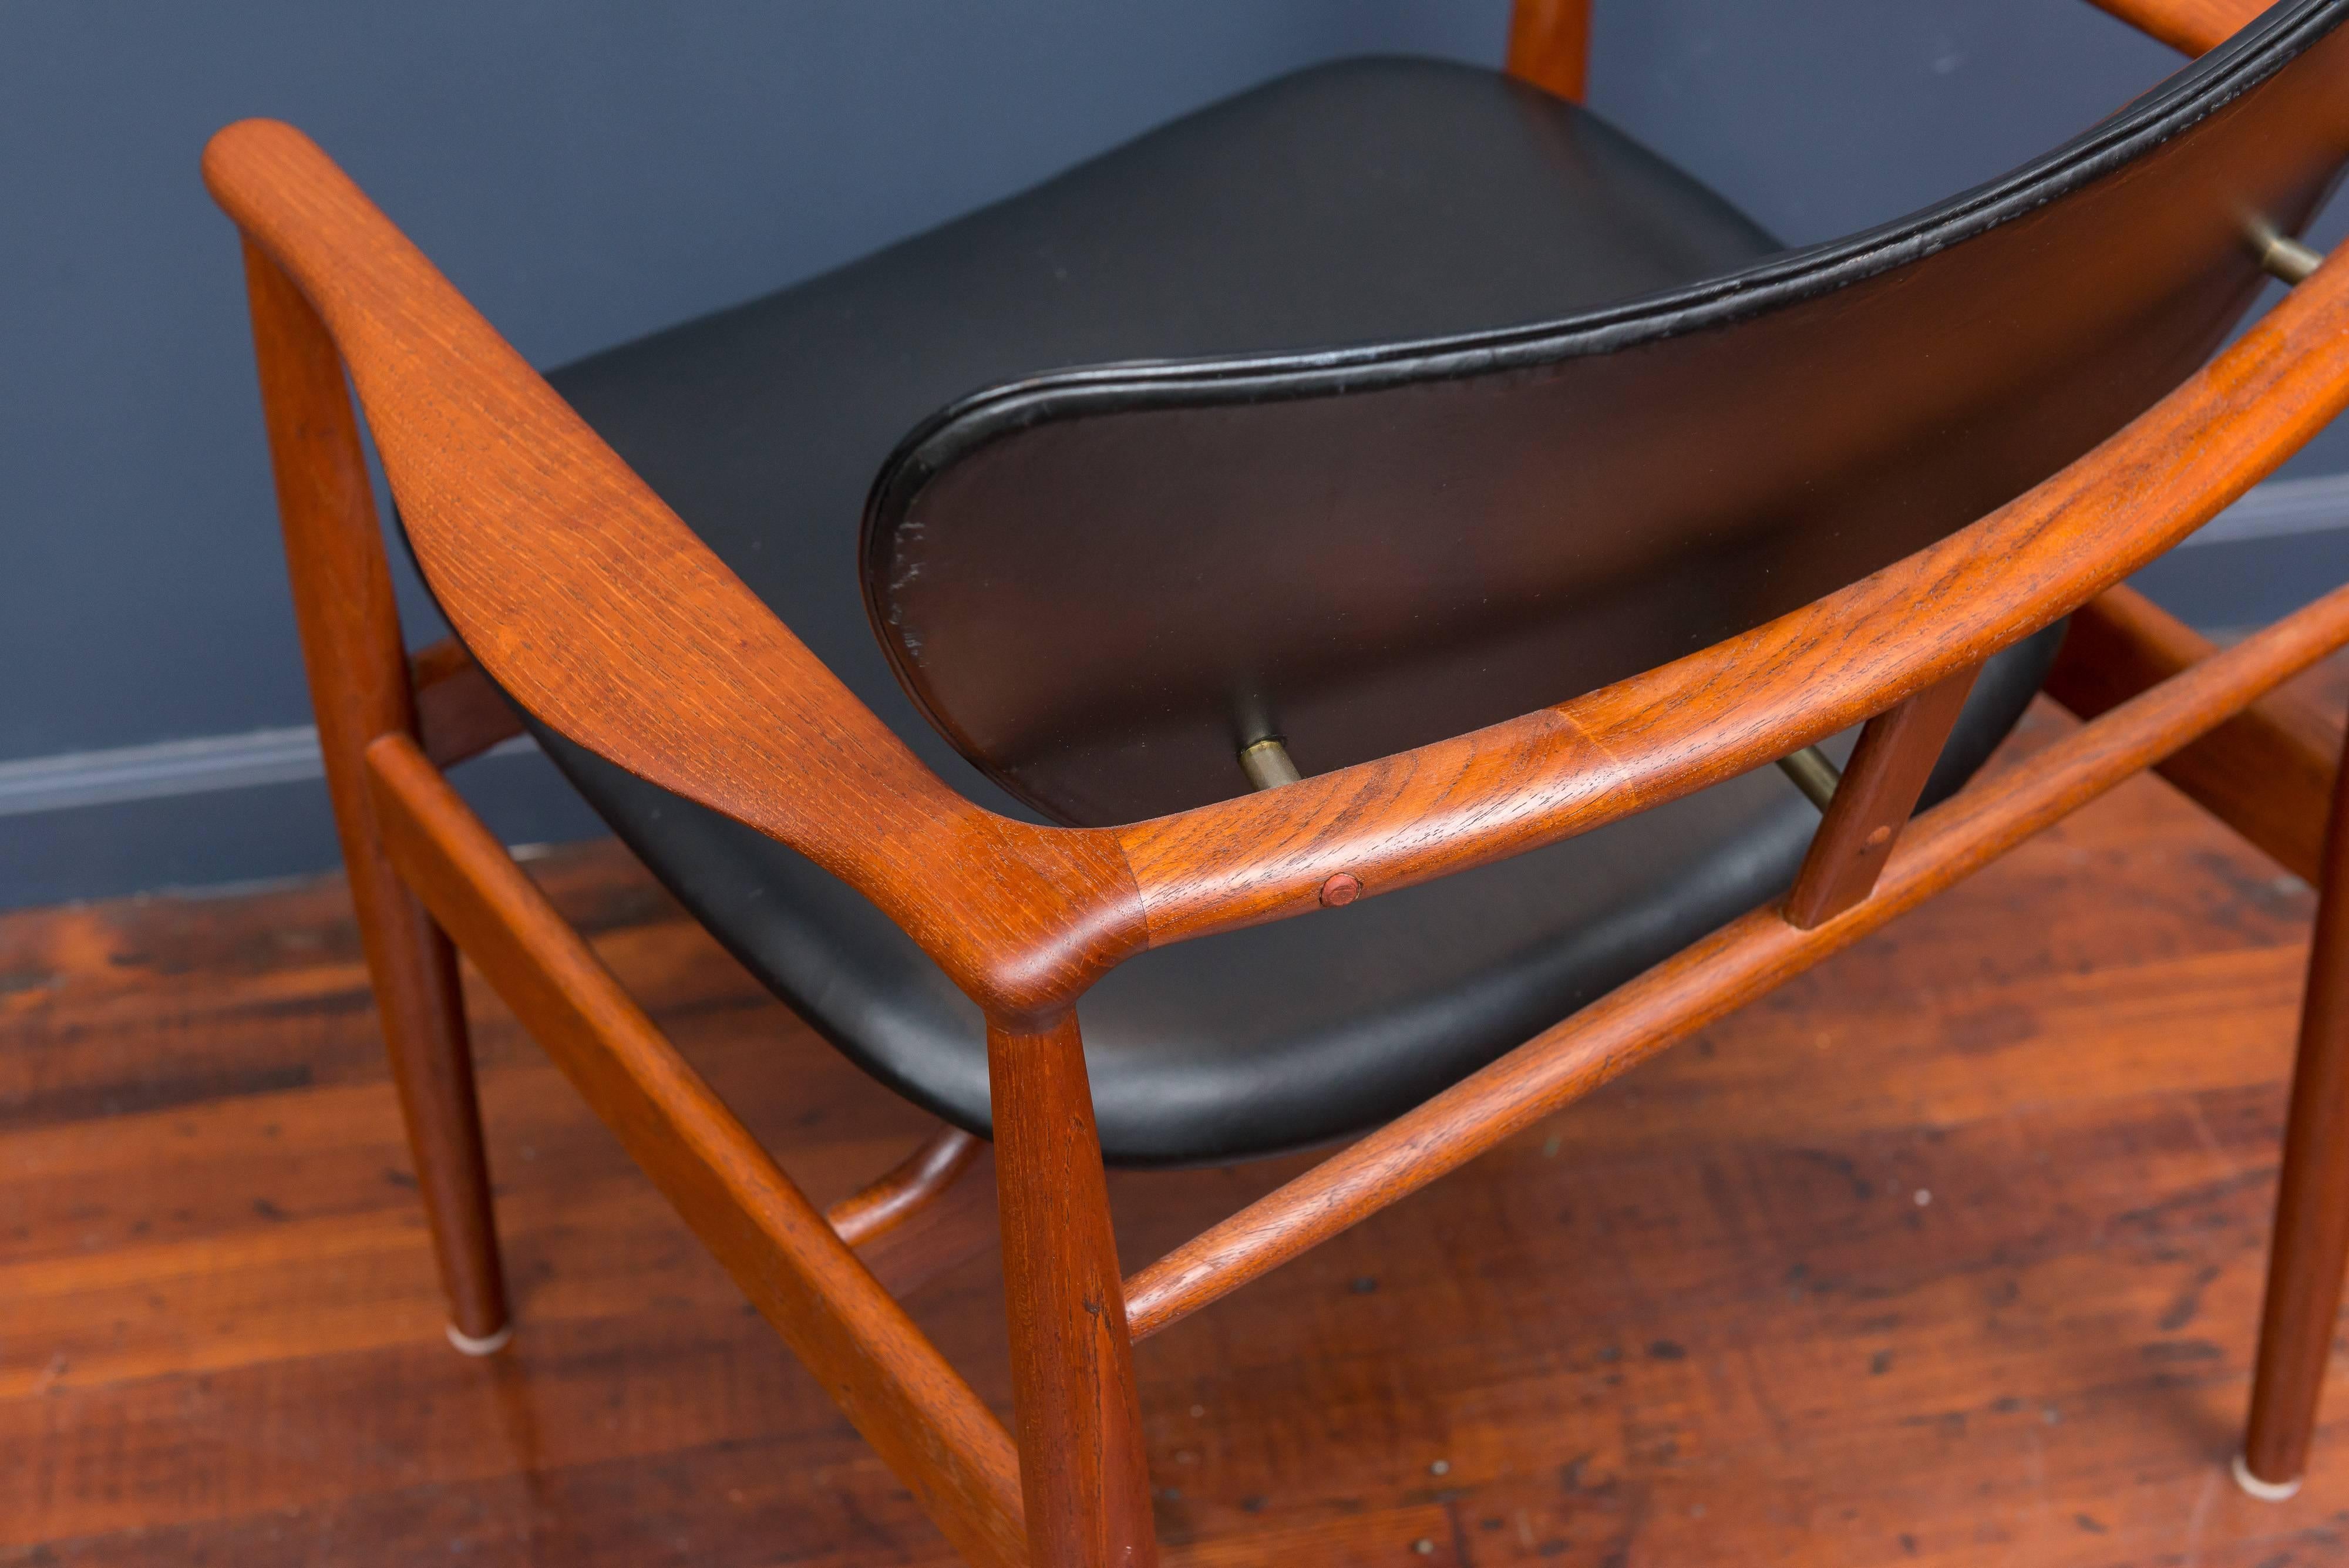 Finn Juhl NV 48 Chair for Niels Vodder In Good Condition For Sale In San Francisco, CA